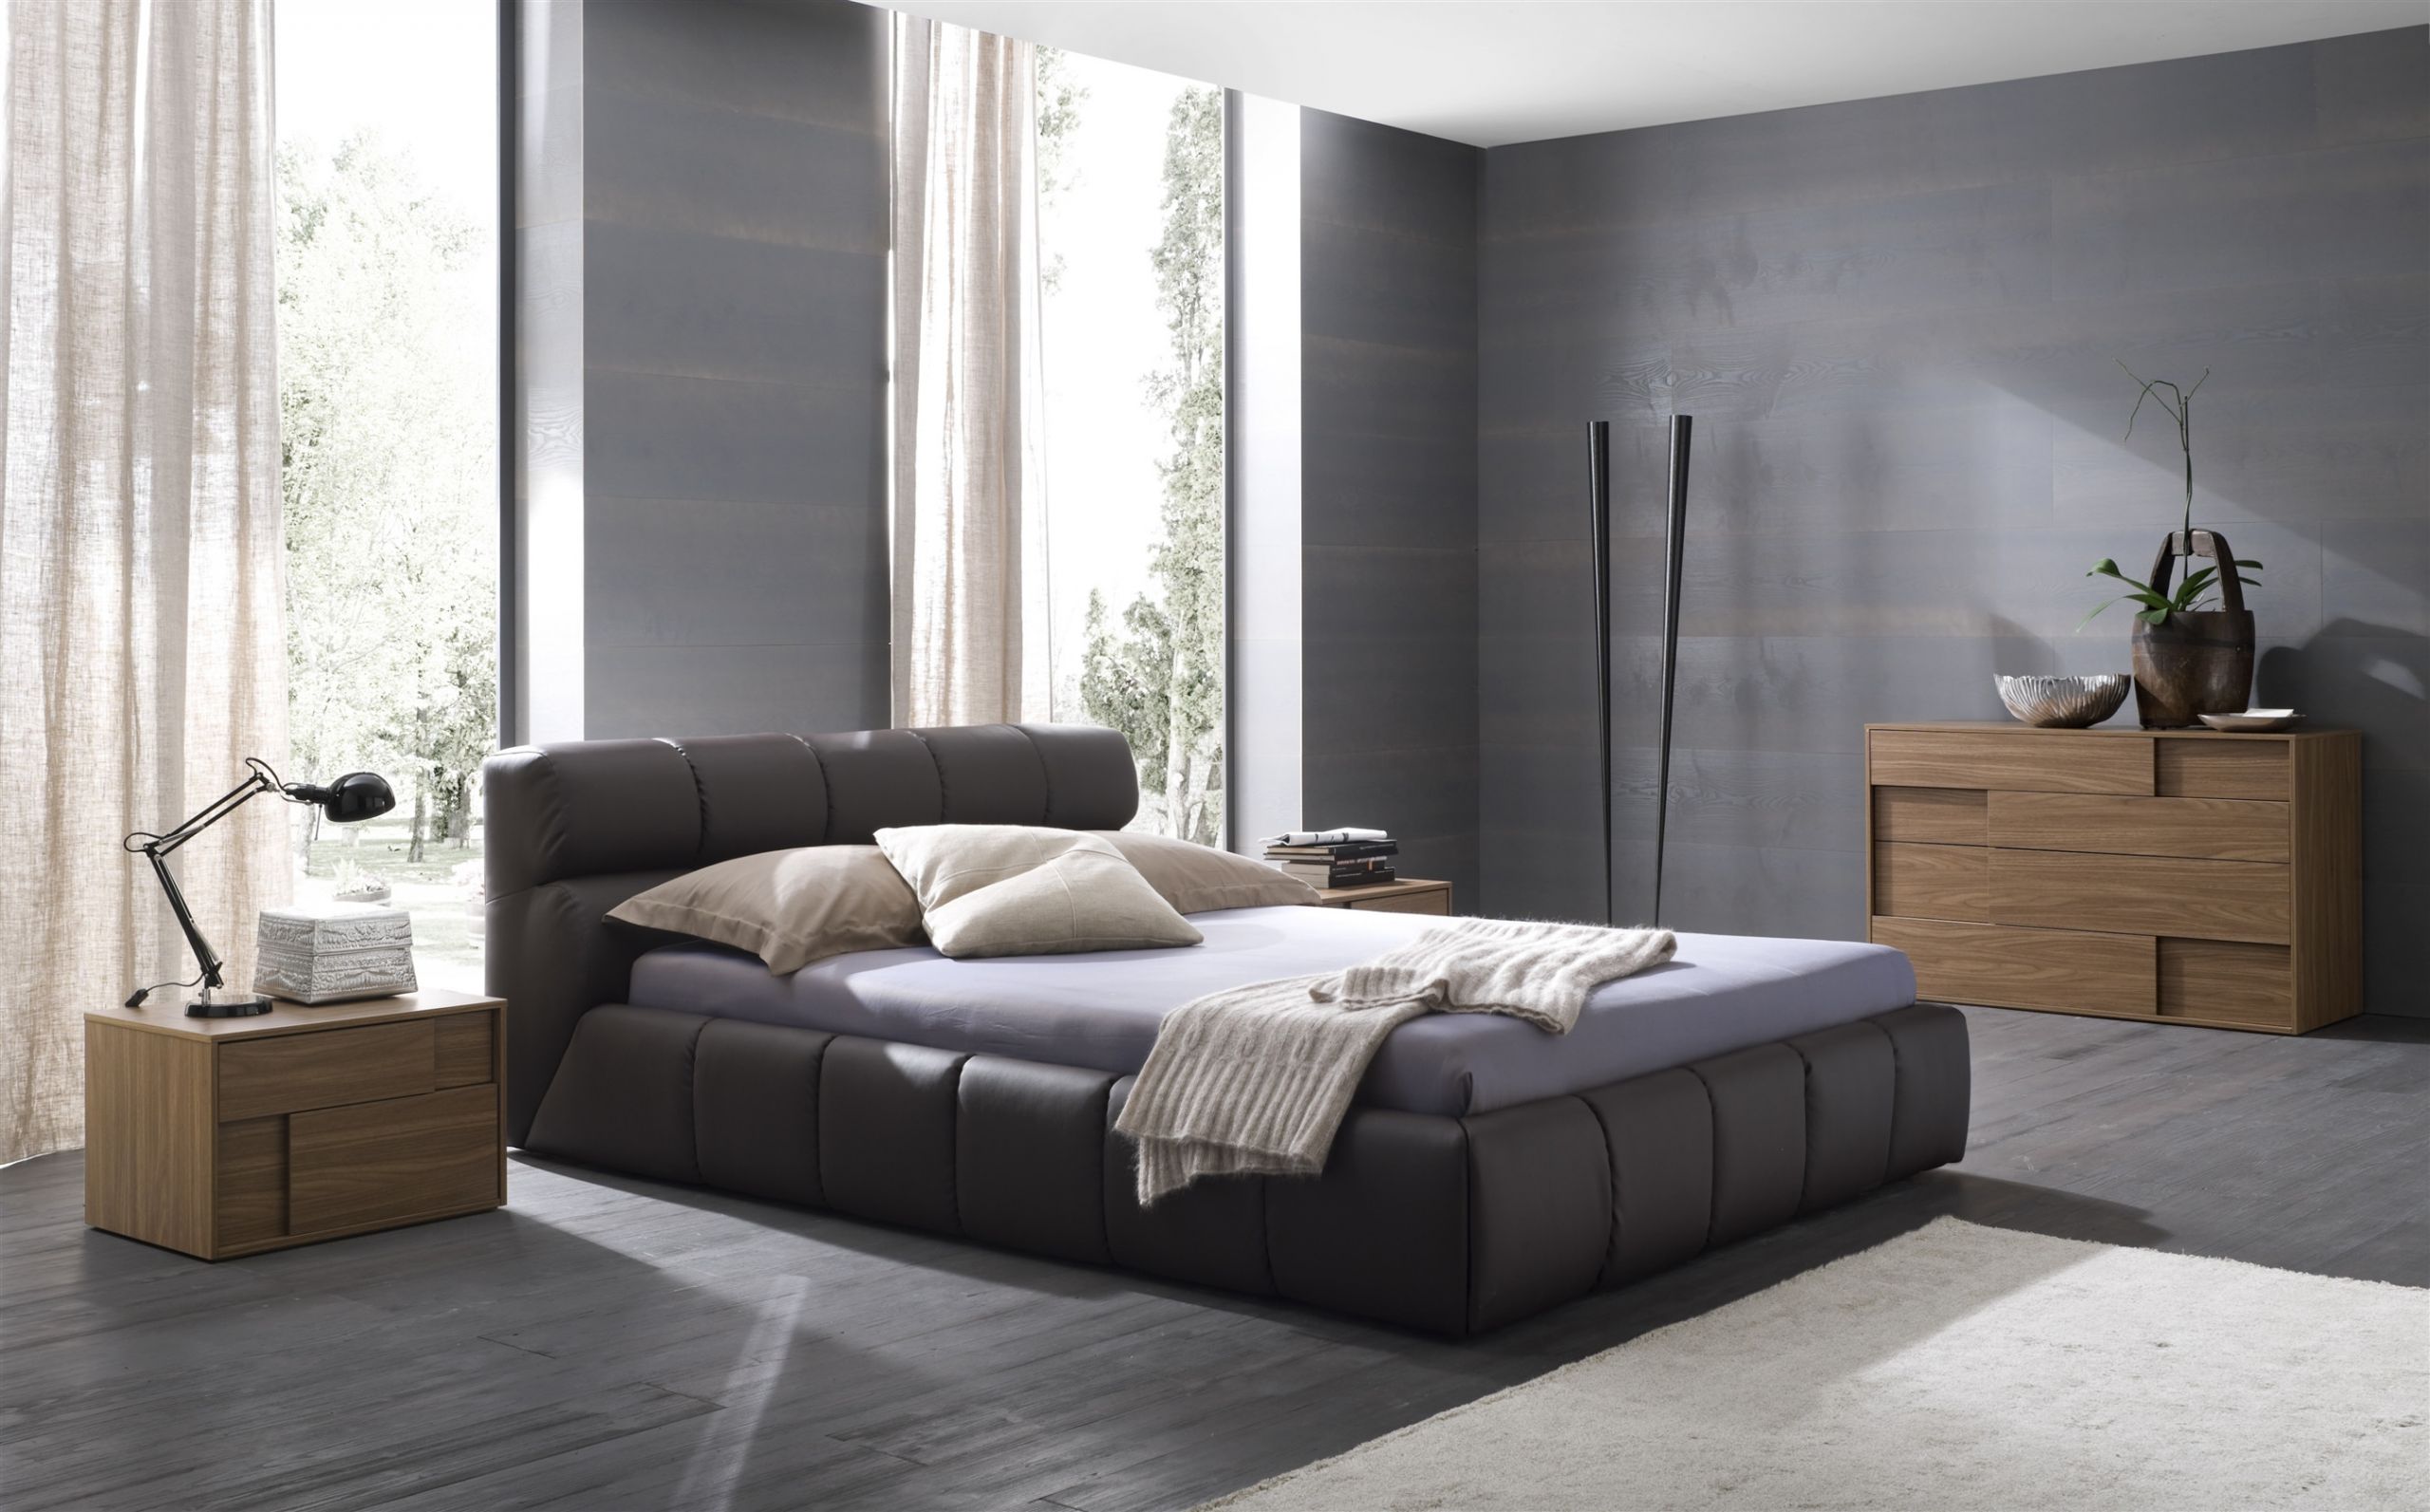 Mens Bedroom Sets
 40 Modern Bedroom For Your Home – The WoW Style